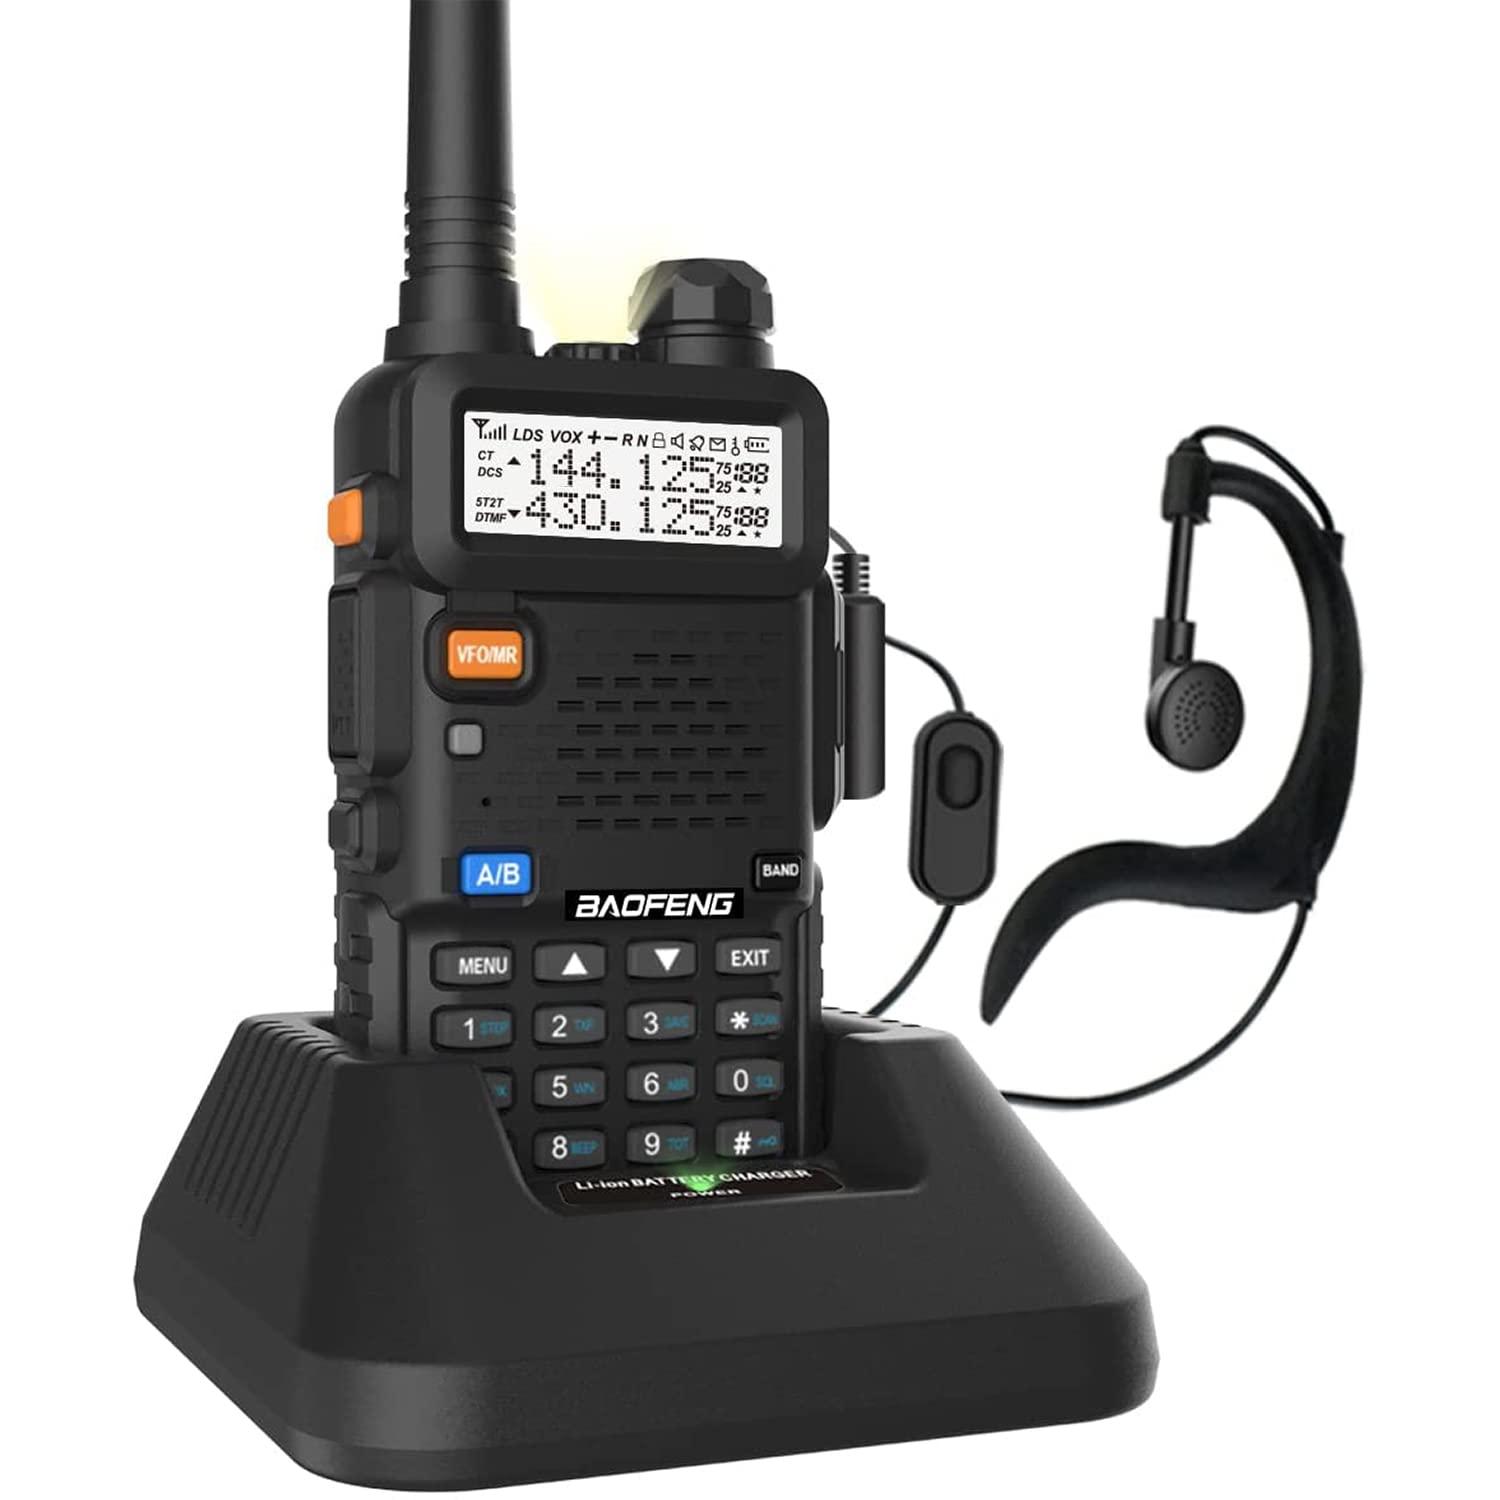 Book Cover BAOFENG UV-5R Dual Band Two Way Radio (Black), 144-148MHz & 420-450MHz